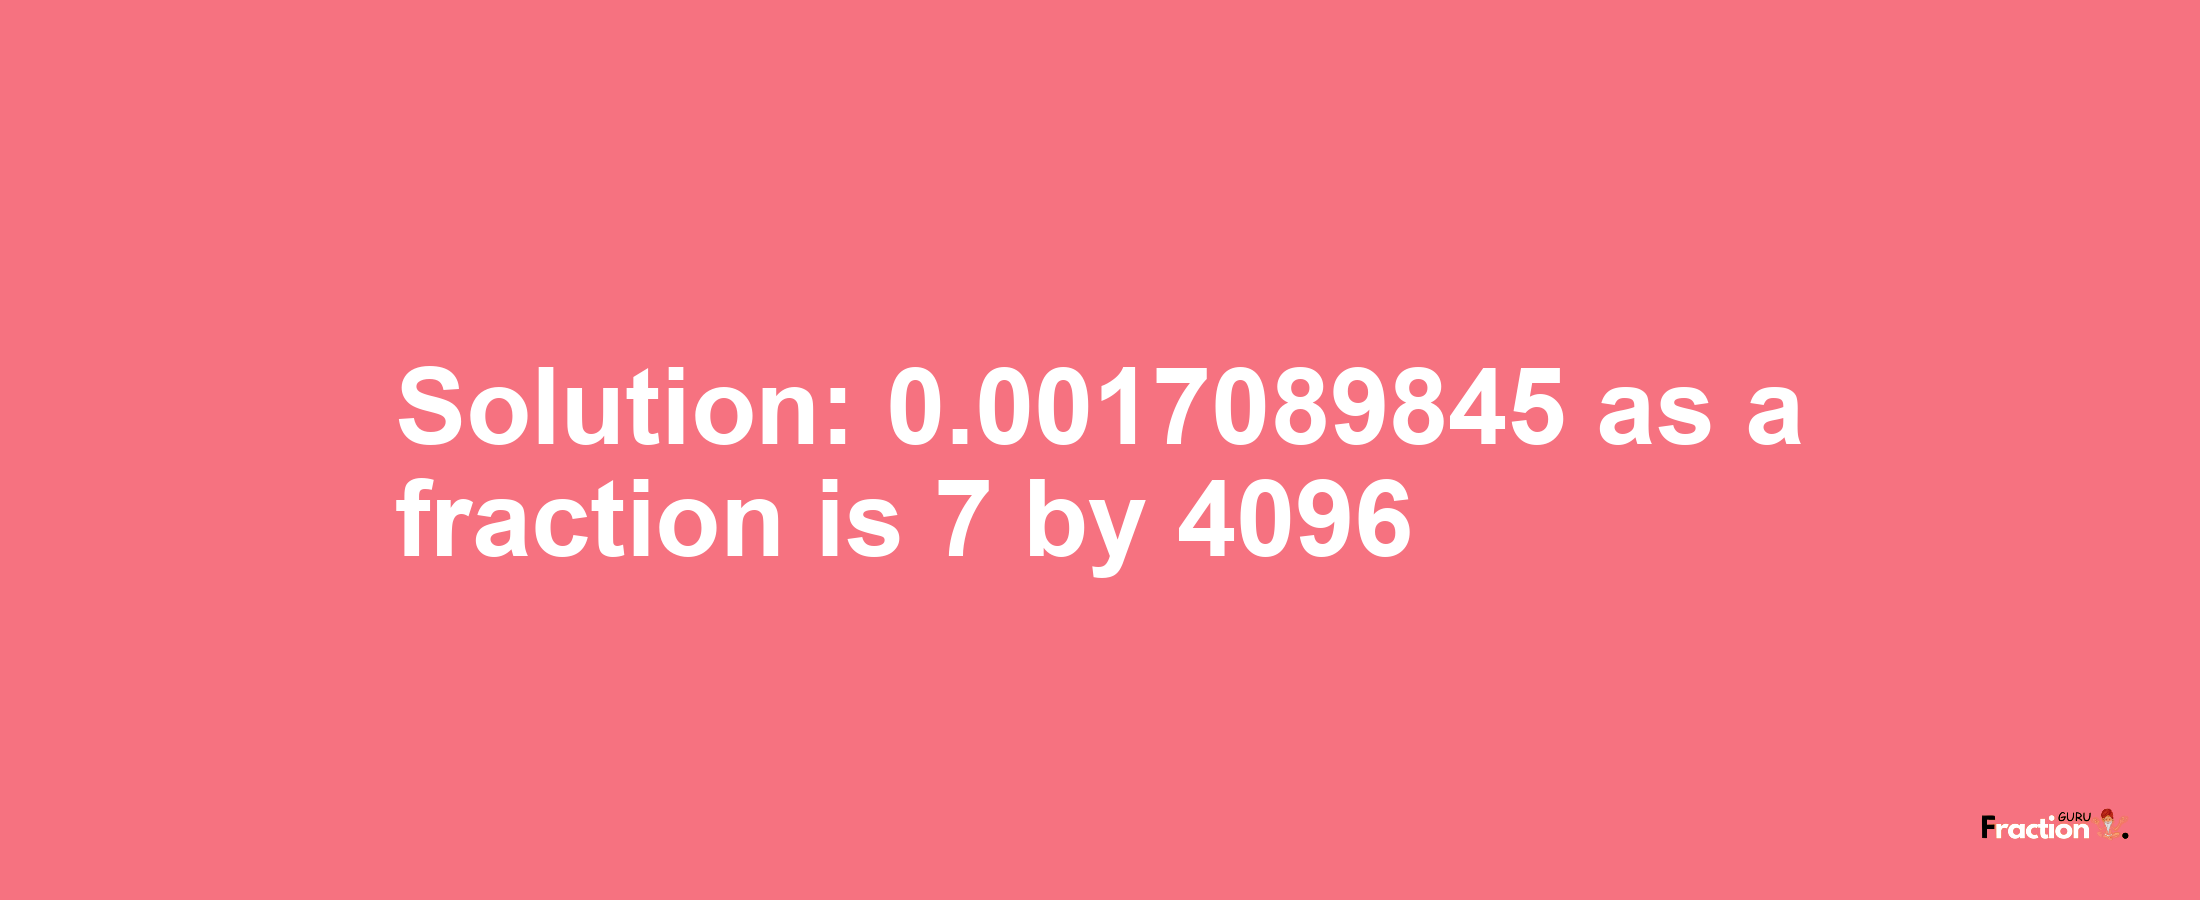 Solution:0.0017089845 as a fraction is 7/4096